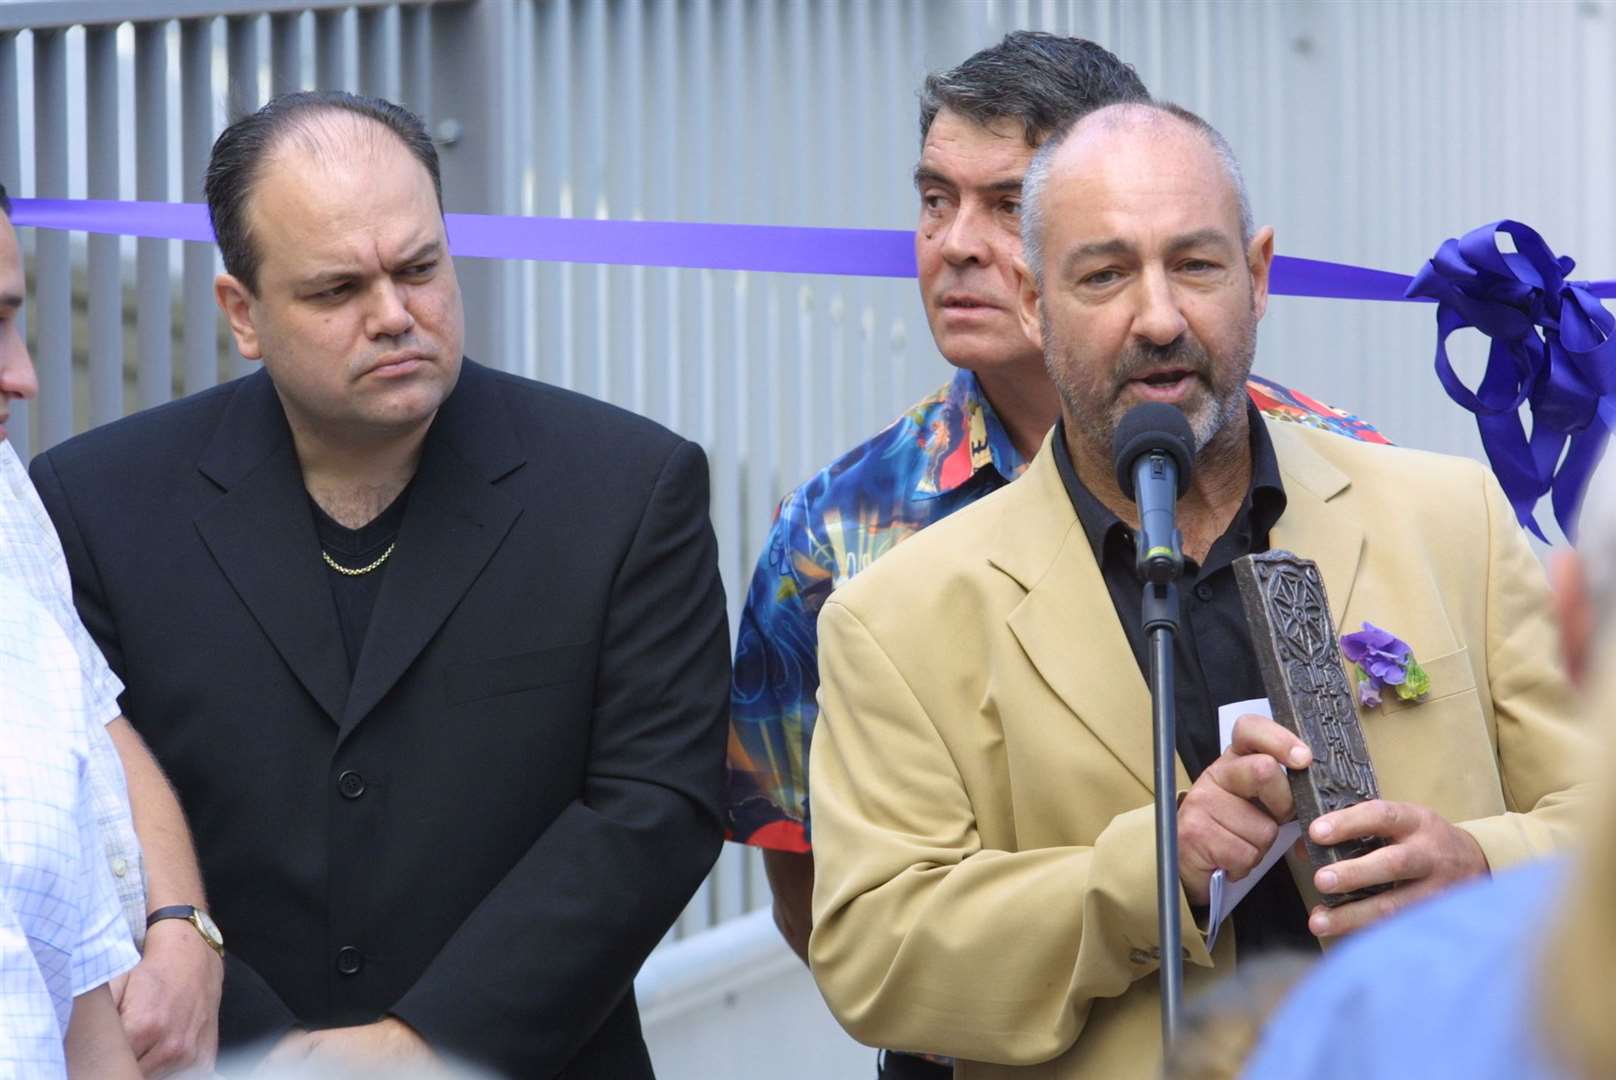 Shaun Williamson, left, the charity's patron, at the opening ceremony in 2002.